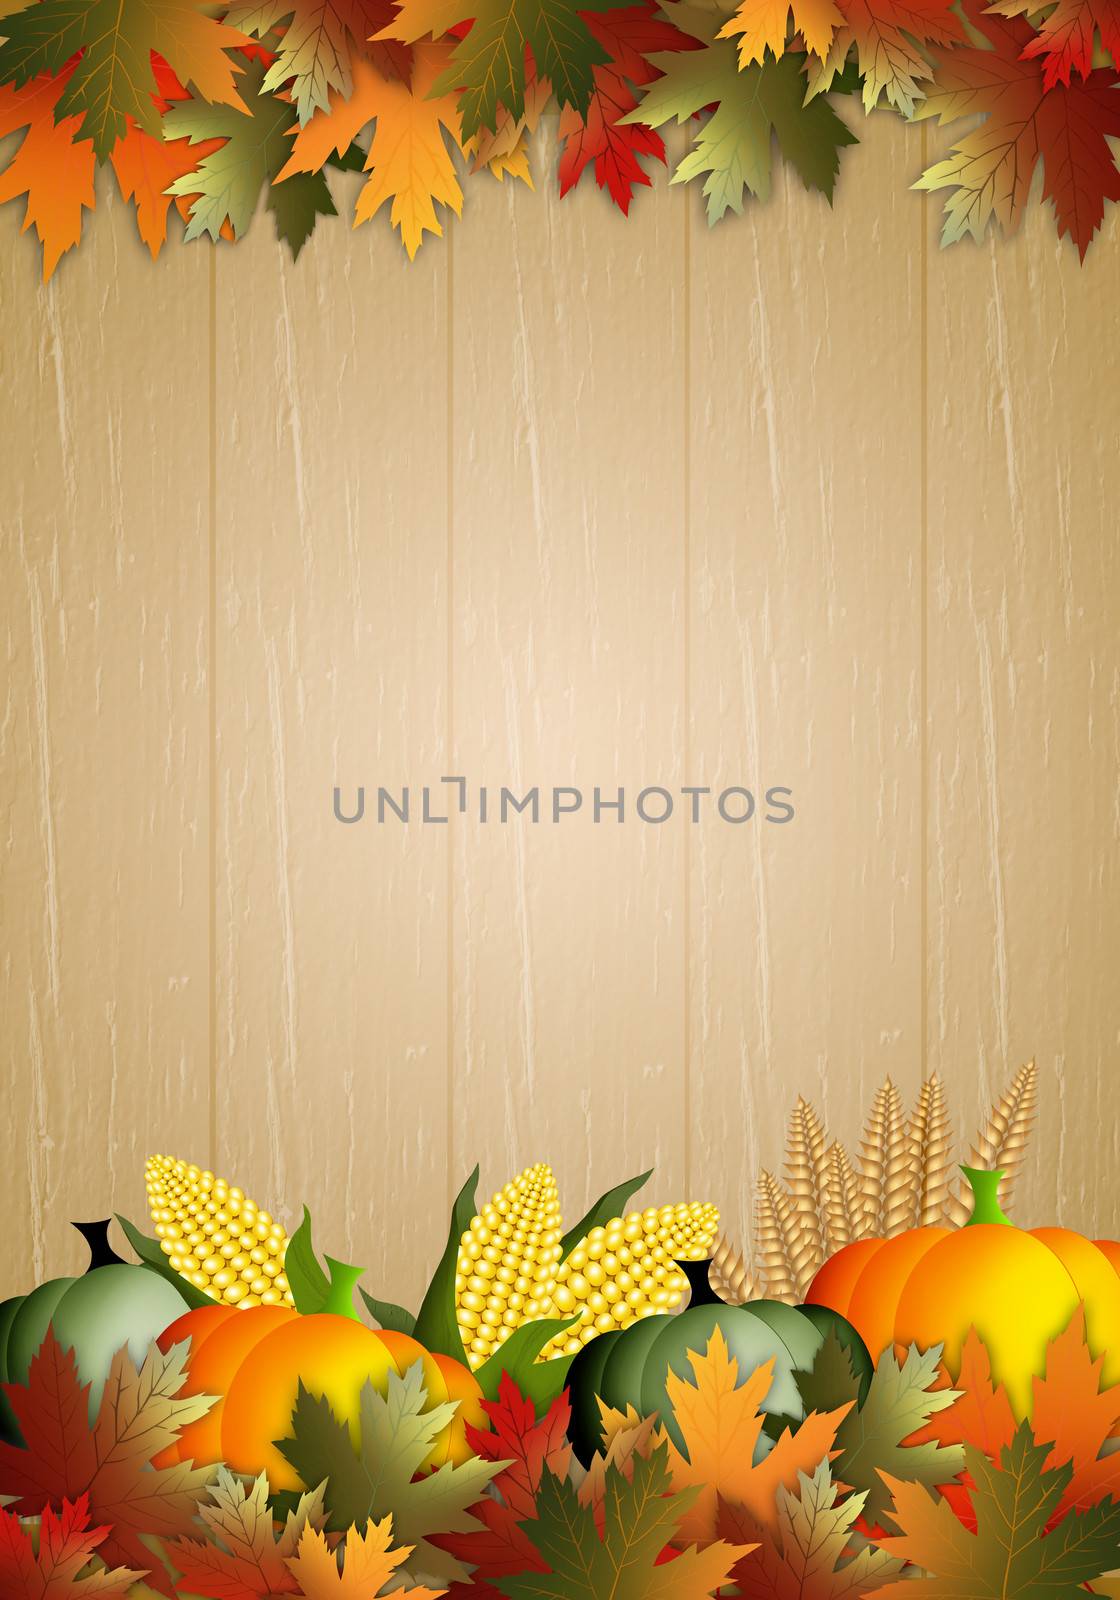 Thanksgiving day background